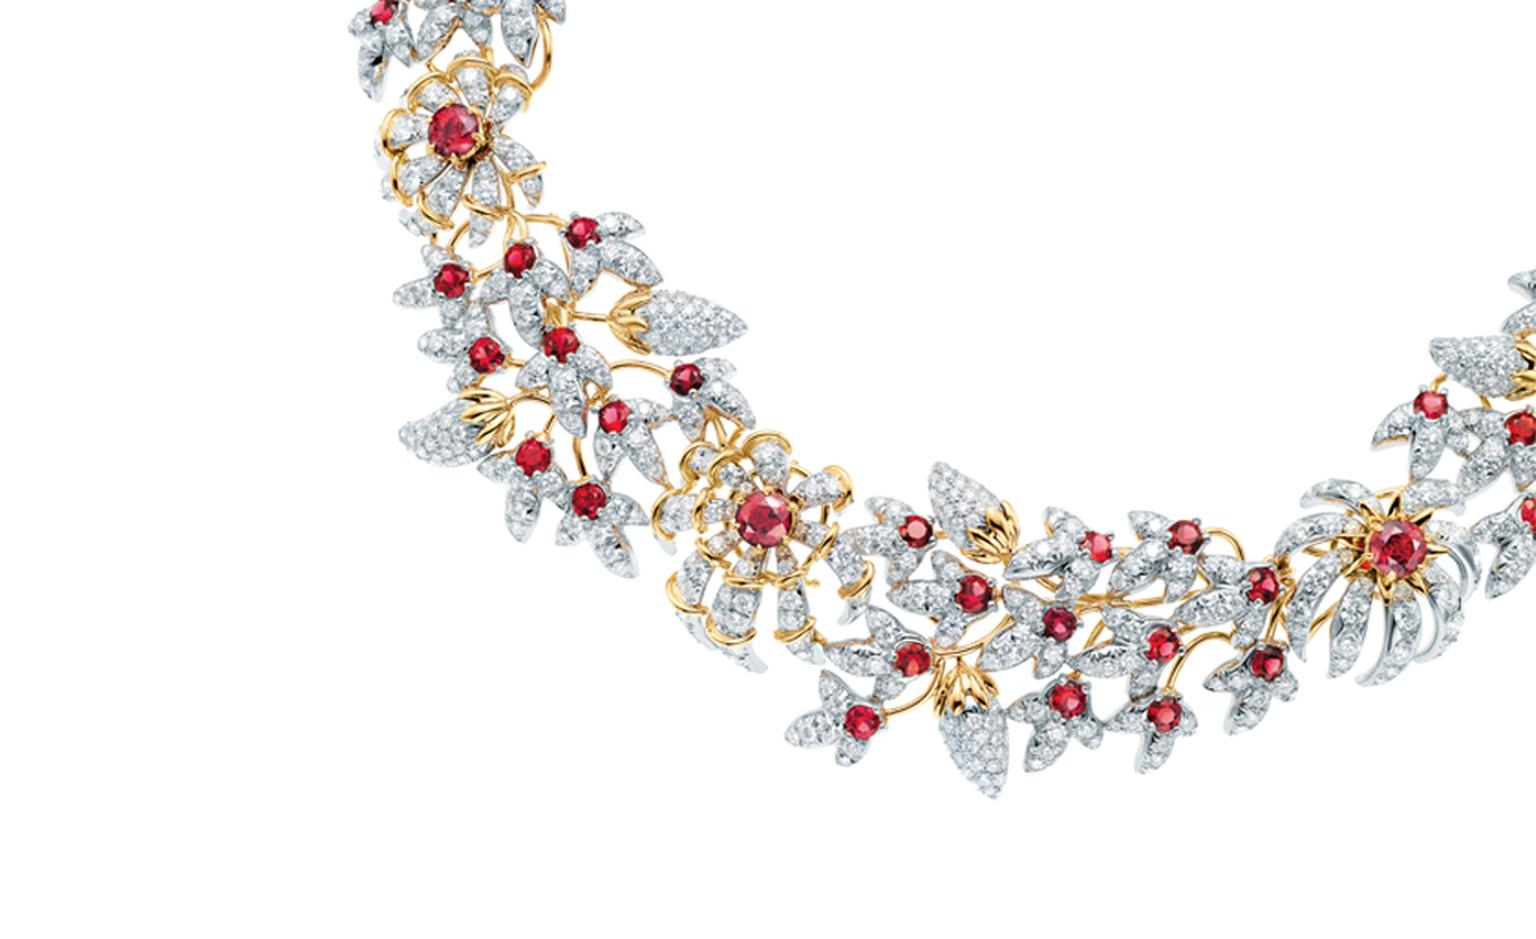 TIFFANY, Jean Schlumberger Conique Necklace. Price from $205,000